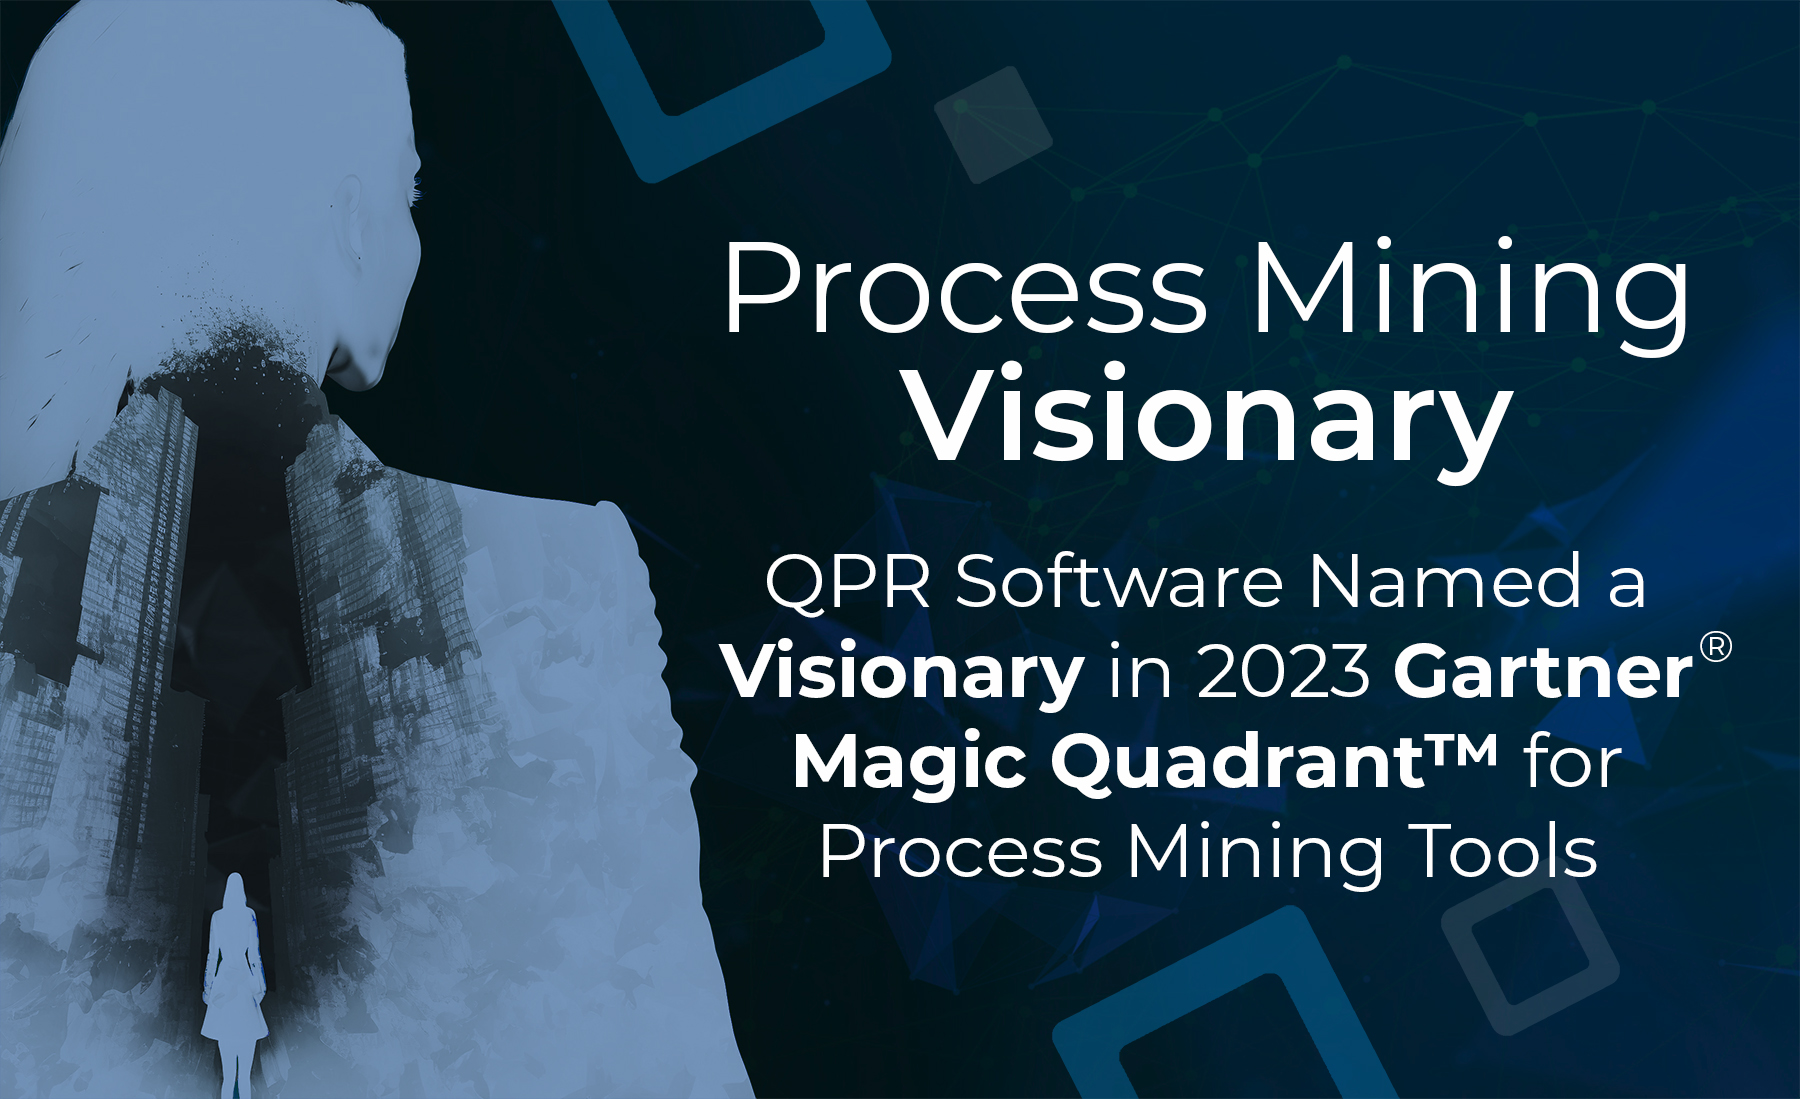 Image that says that QPR Software is Named a Visionary in 2023 Gartner® Magic Quadrant™ for Process Mining Tools